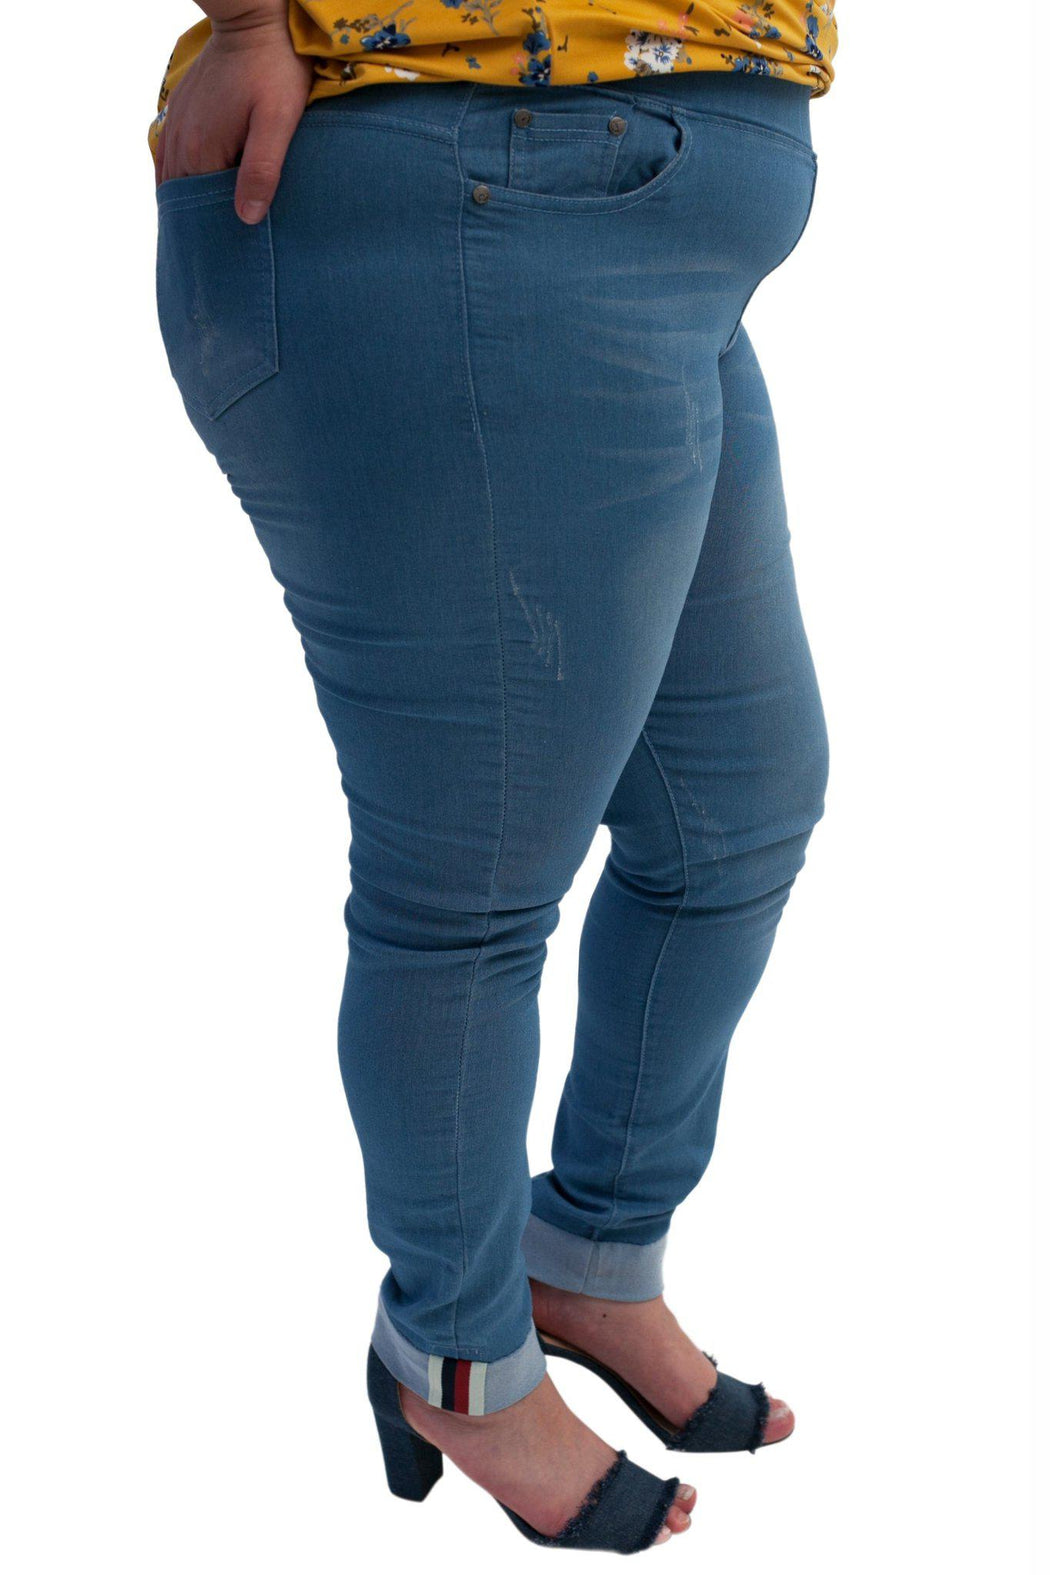 skinny jeans with cuffed bottoms